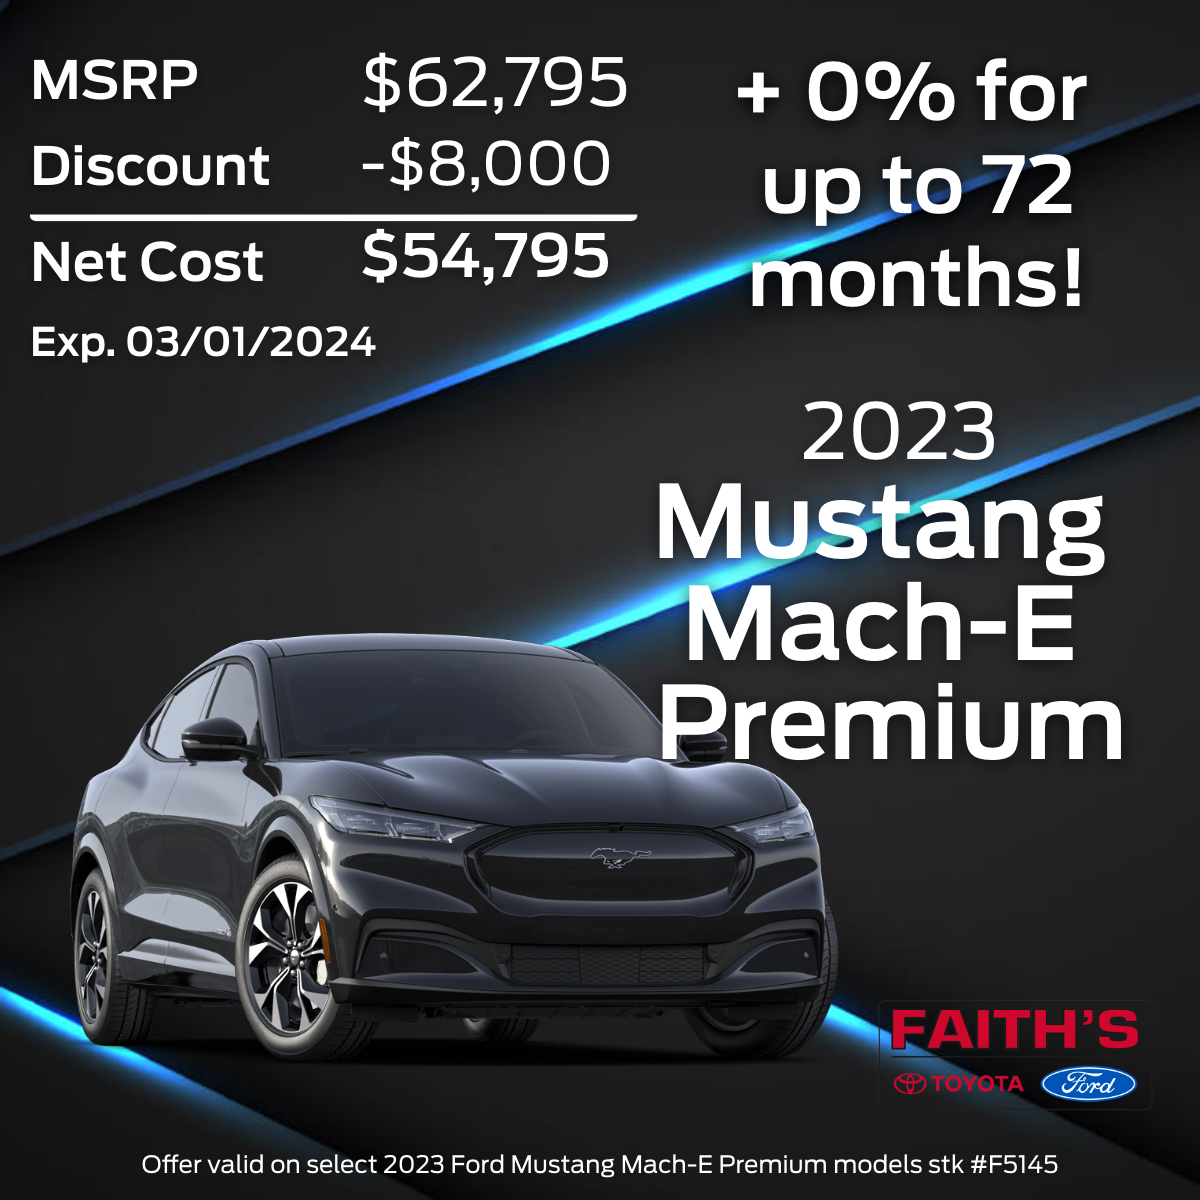 2023 Ford Mustang Mach-E Purchase Offer | Faiths Auto Group